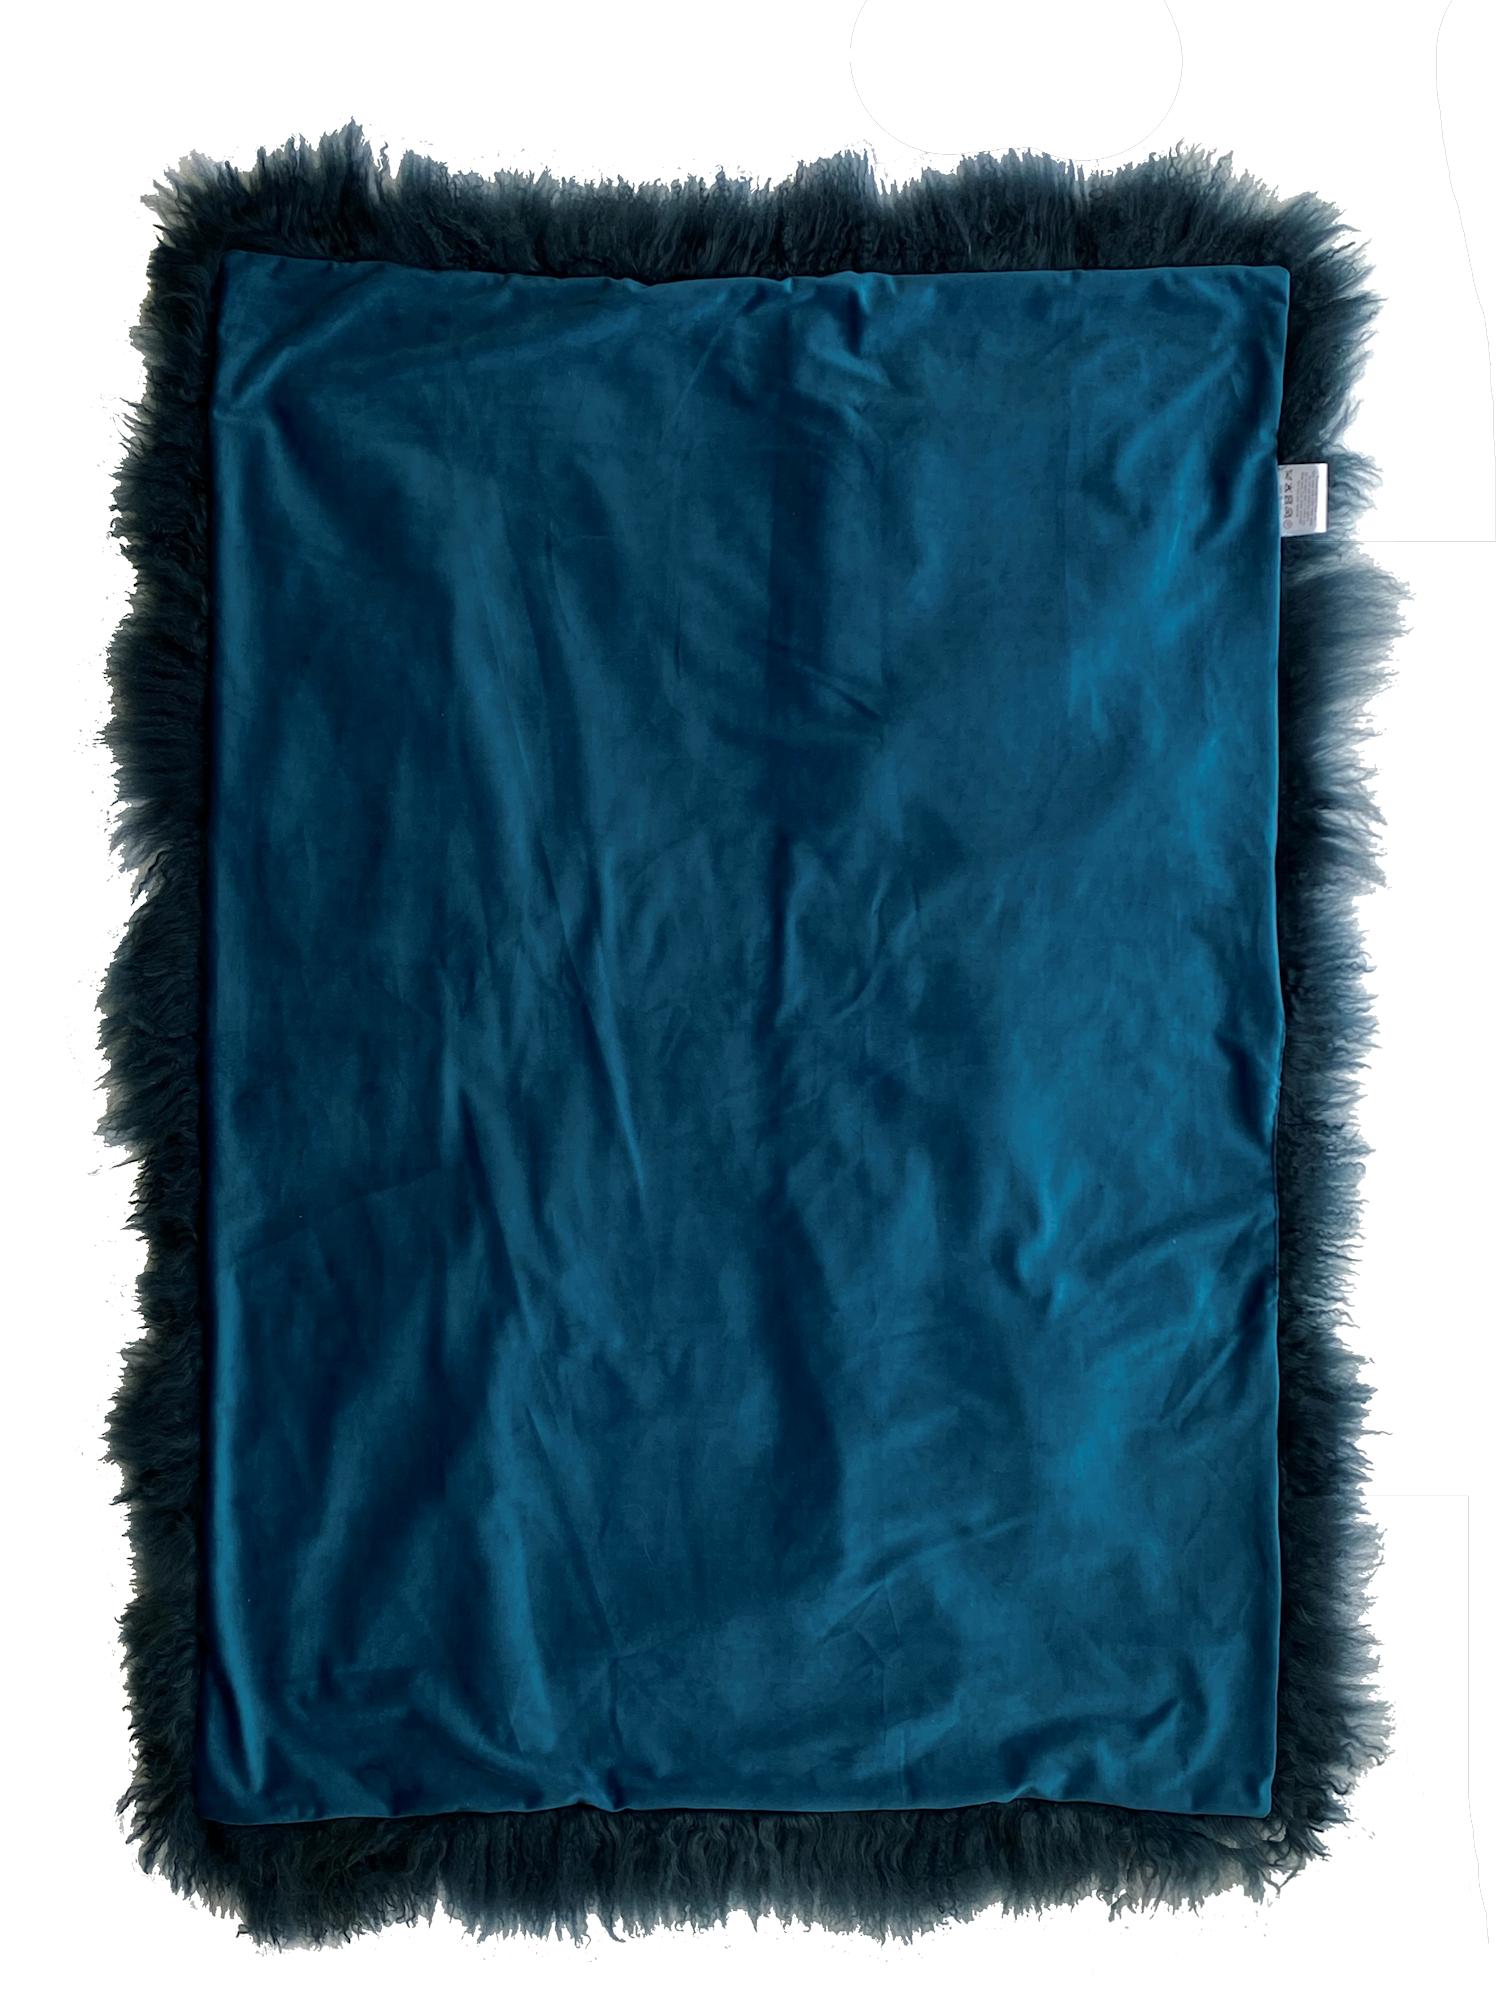 This super luxe Mongolian fur throw will add luxurious elements to your décor. Whether styling a sofa, bed or chair, this sofa or bed throw will instantly revamp a décor as the curly / crimp fur like wool drapes effortlessly styled on its own or